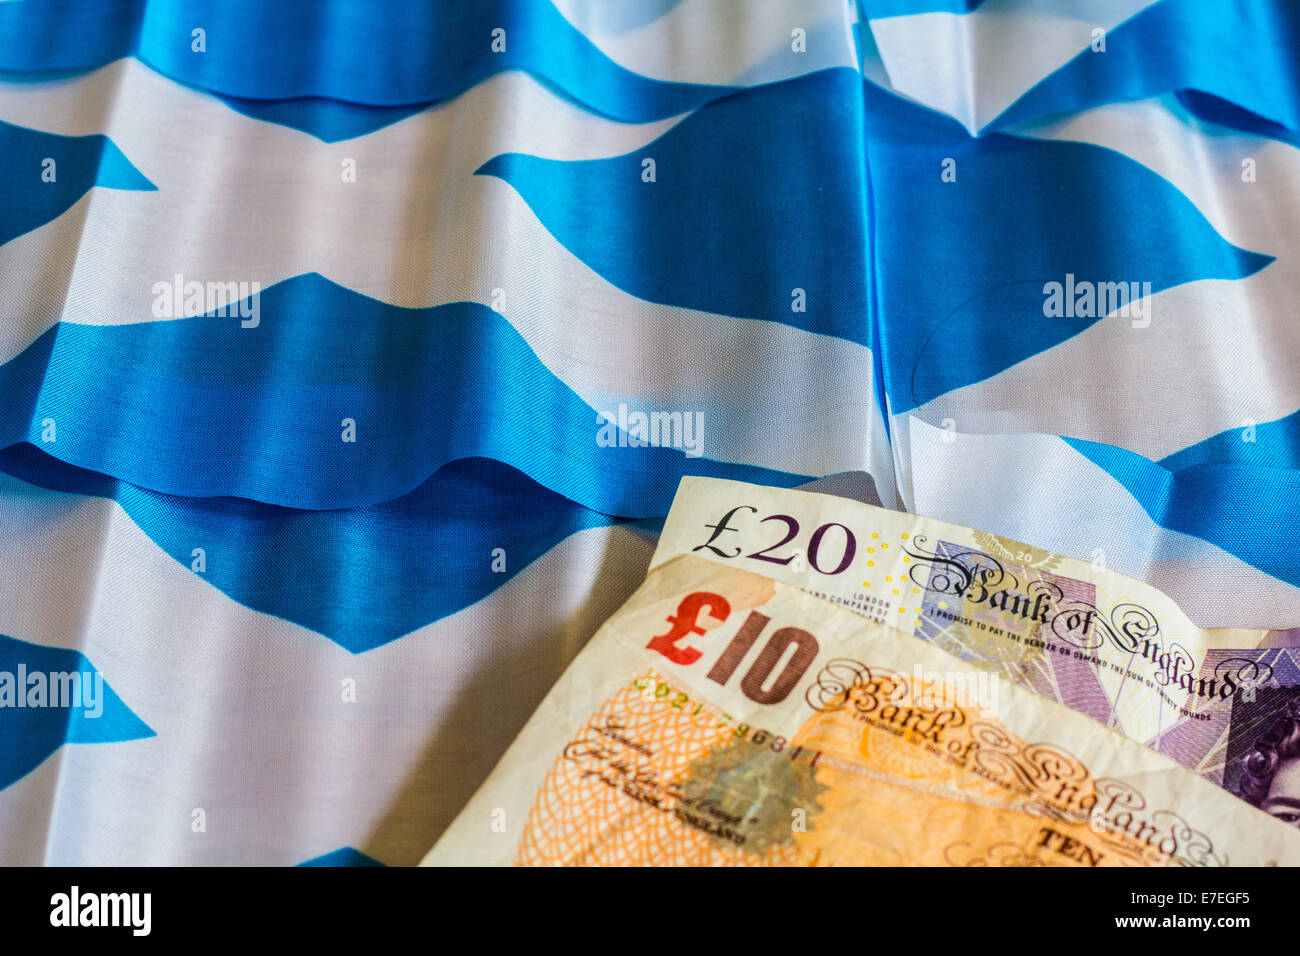 Scottish flags and currency Stock Photo